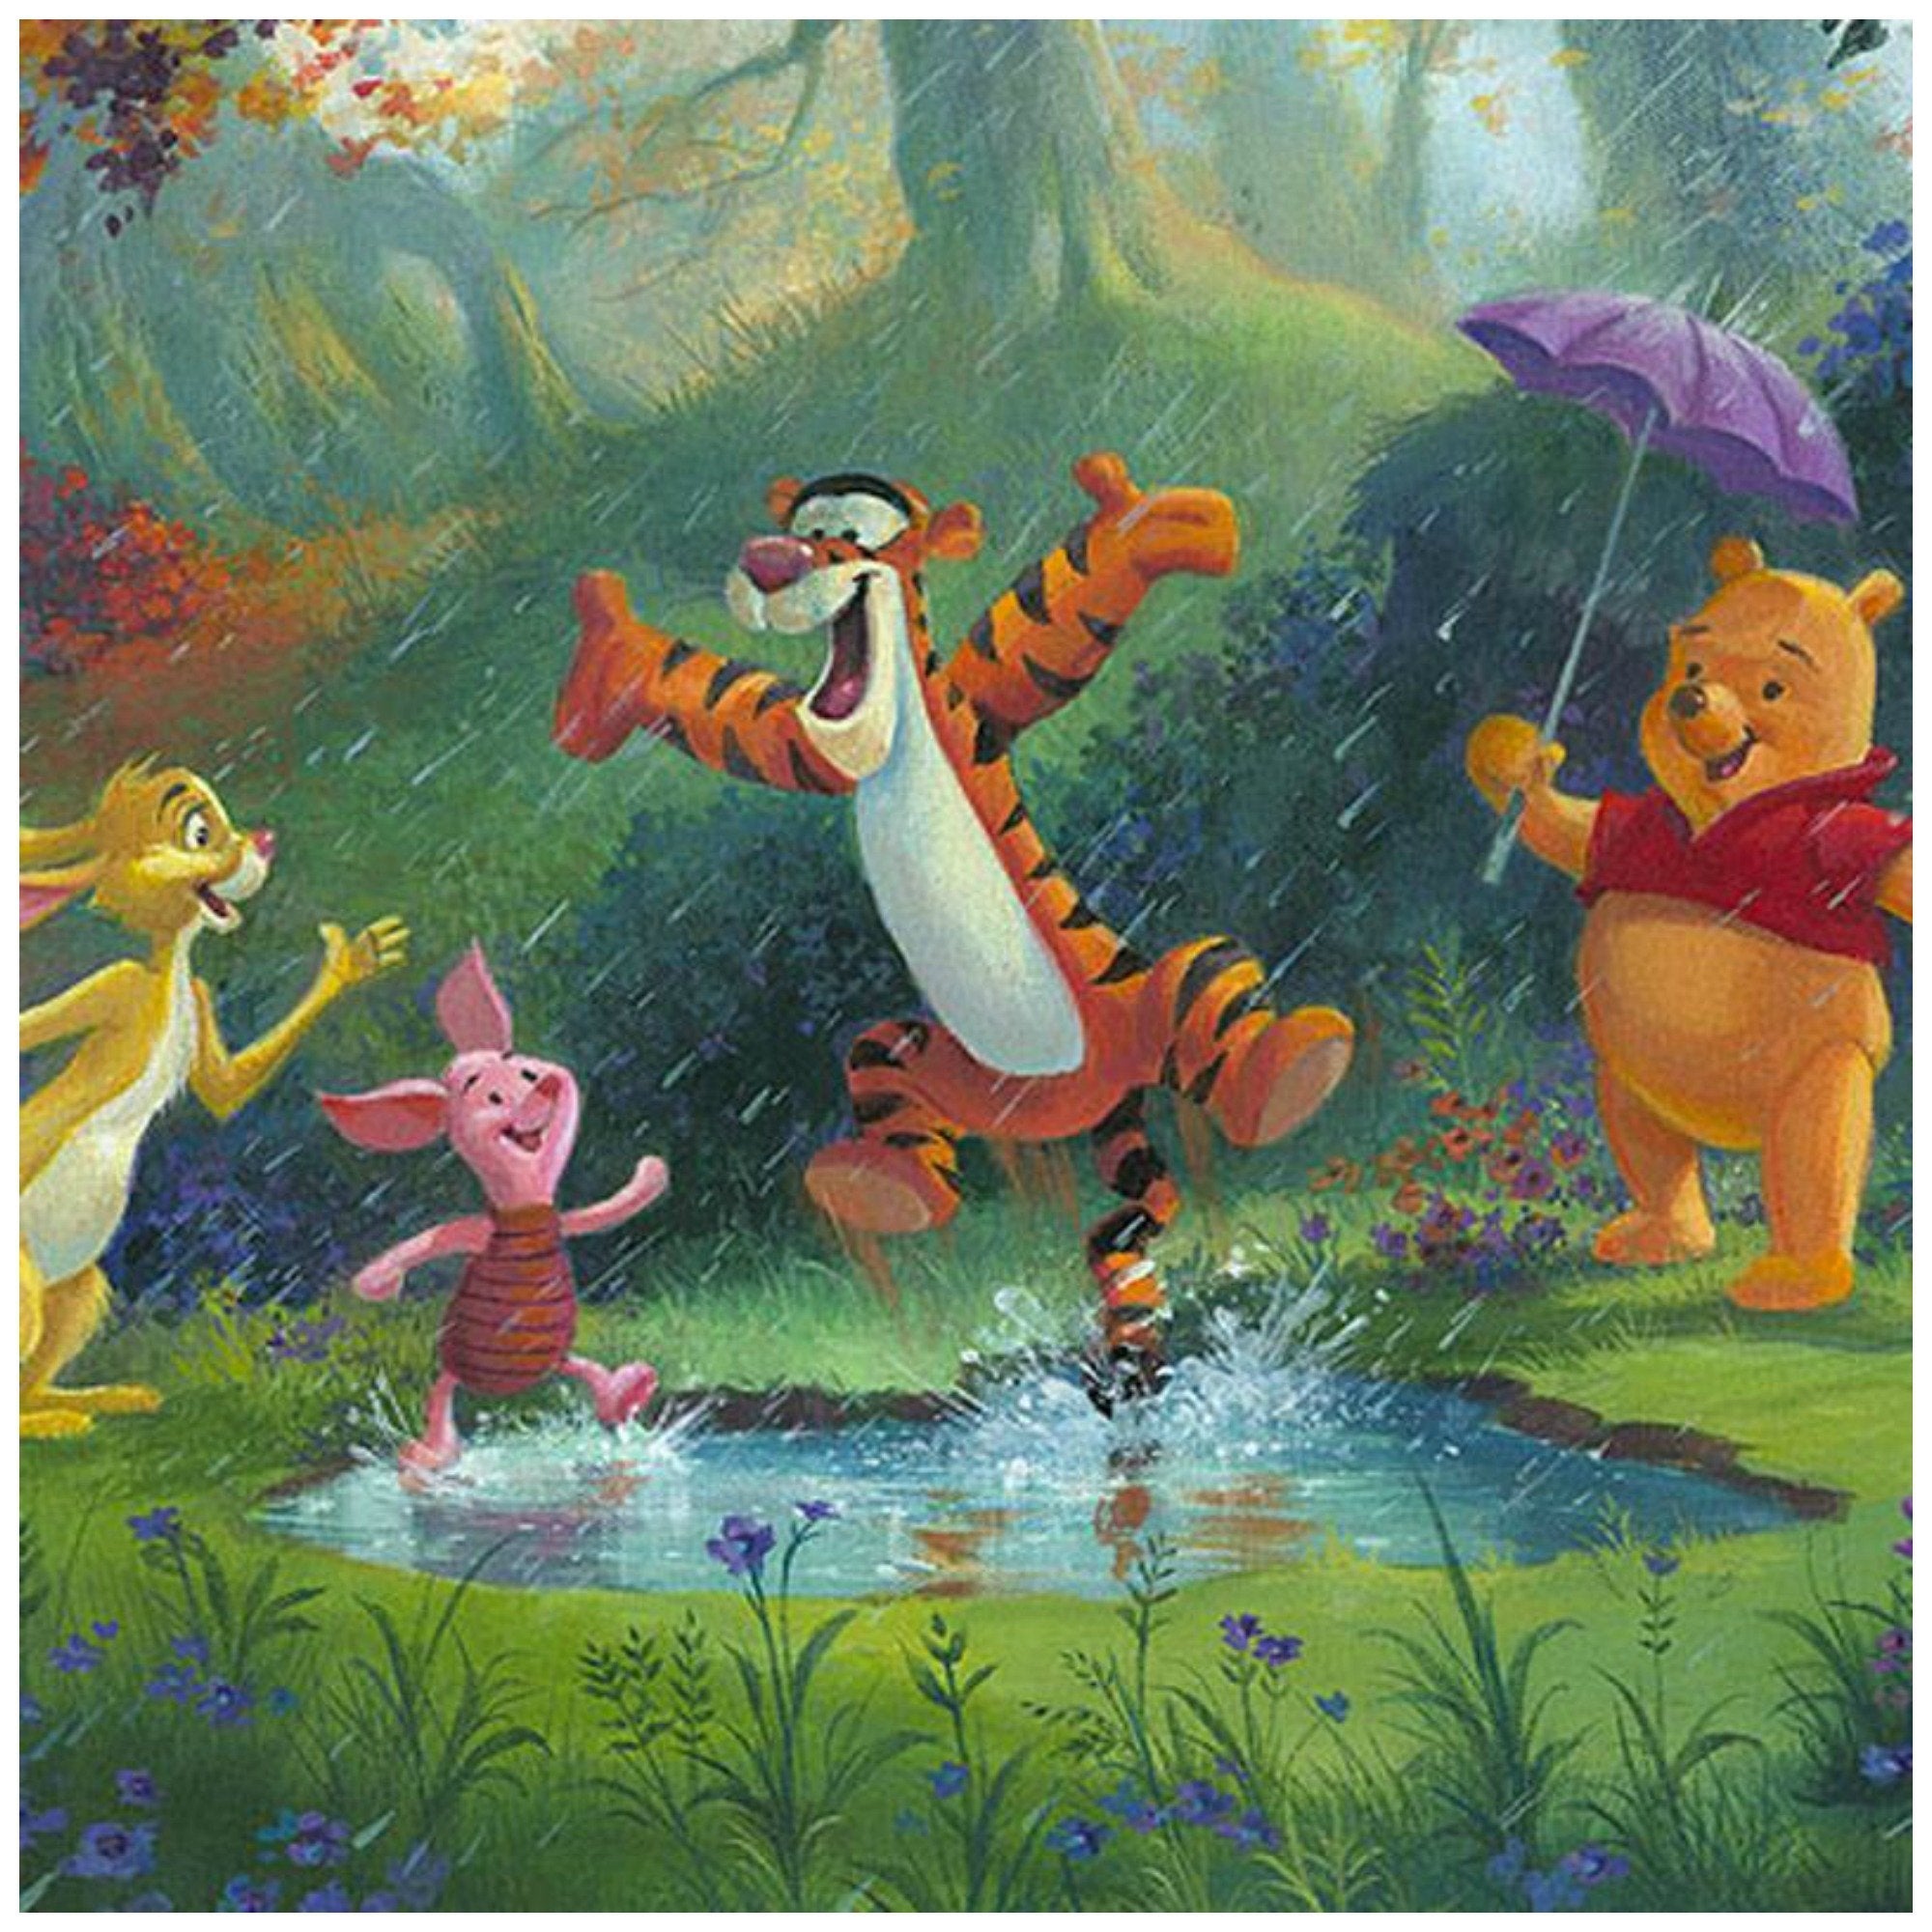 Puddle Jumping by Michael Humphries  Tigger, and Piglet, are playing in a large puddle of water, as Rabbit and Winnie the Pooh watch - closeup